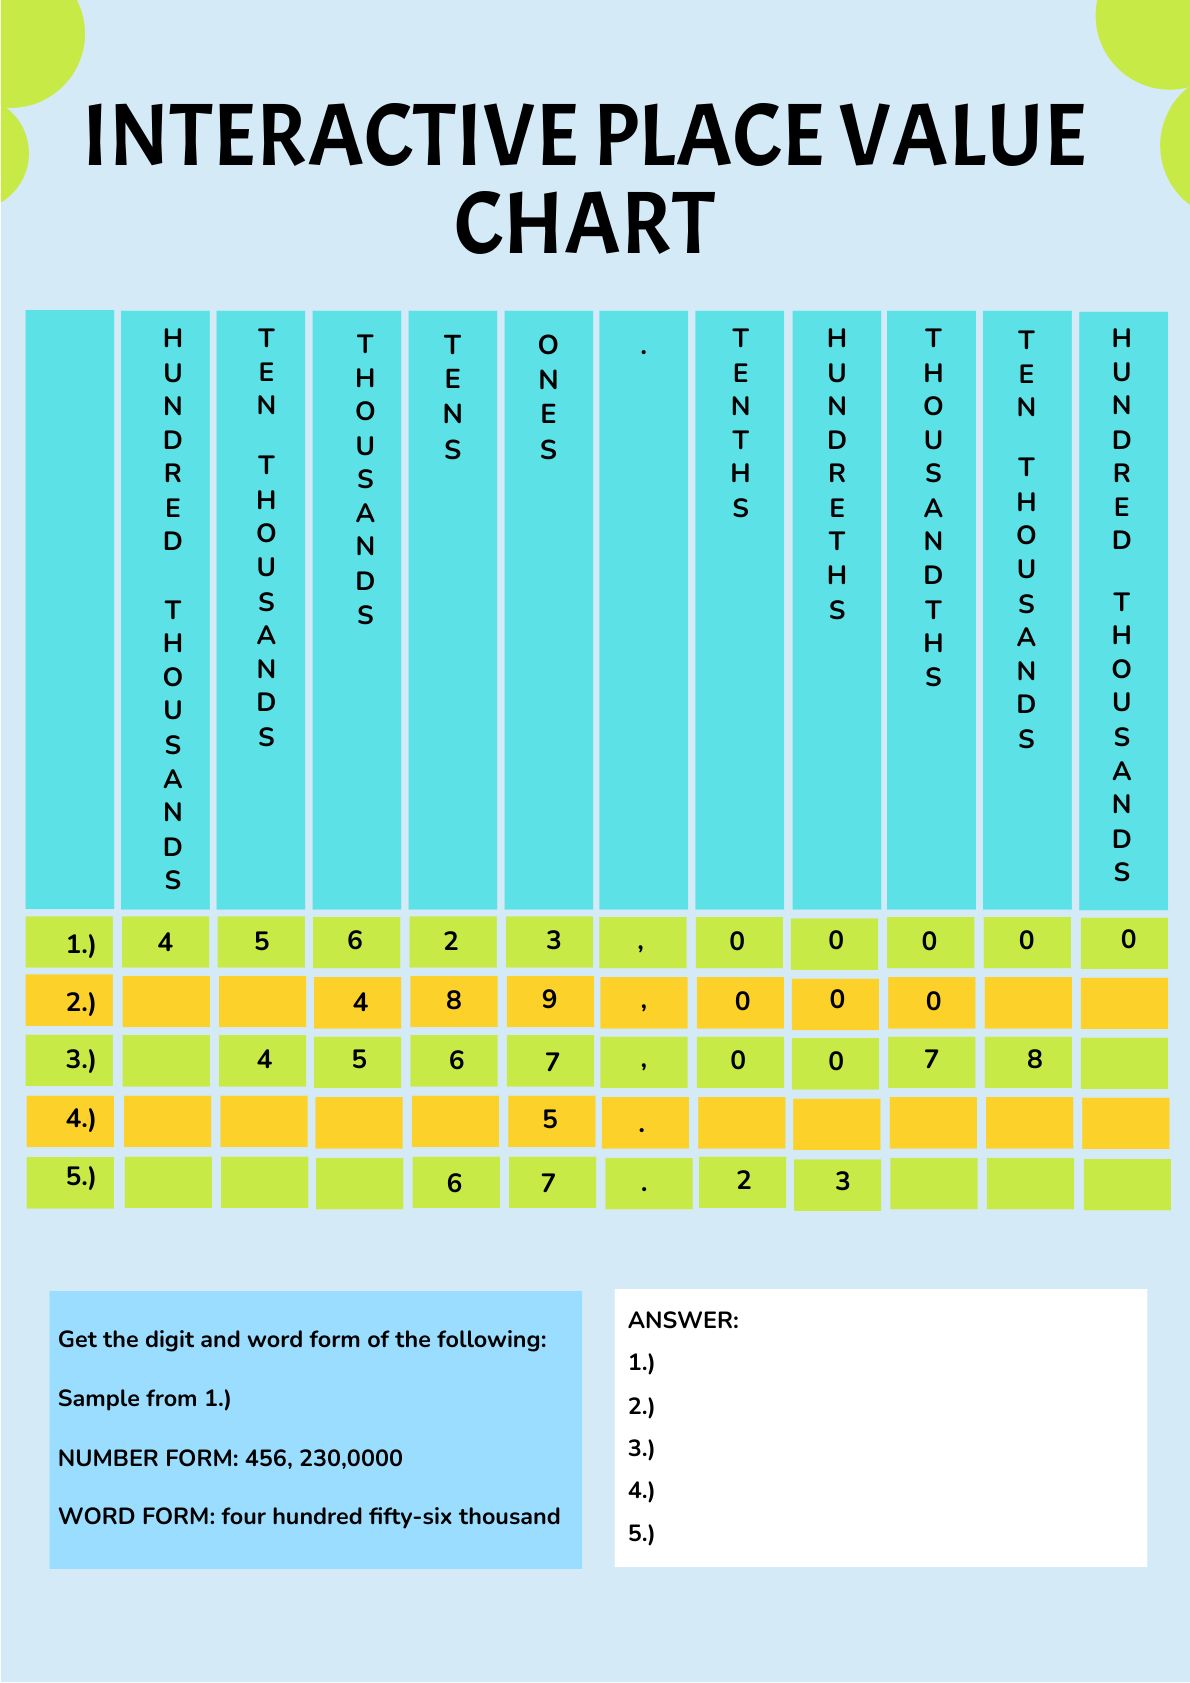 interactive-place-value-chart-pdf-illustrator-template